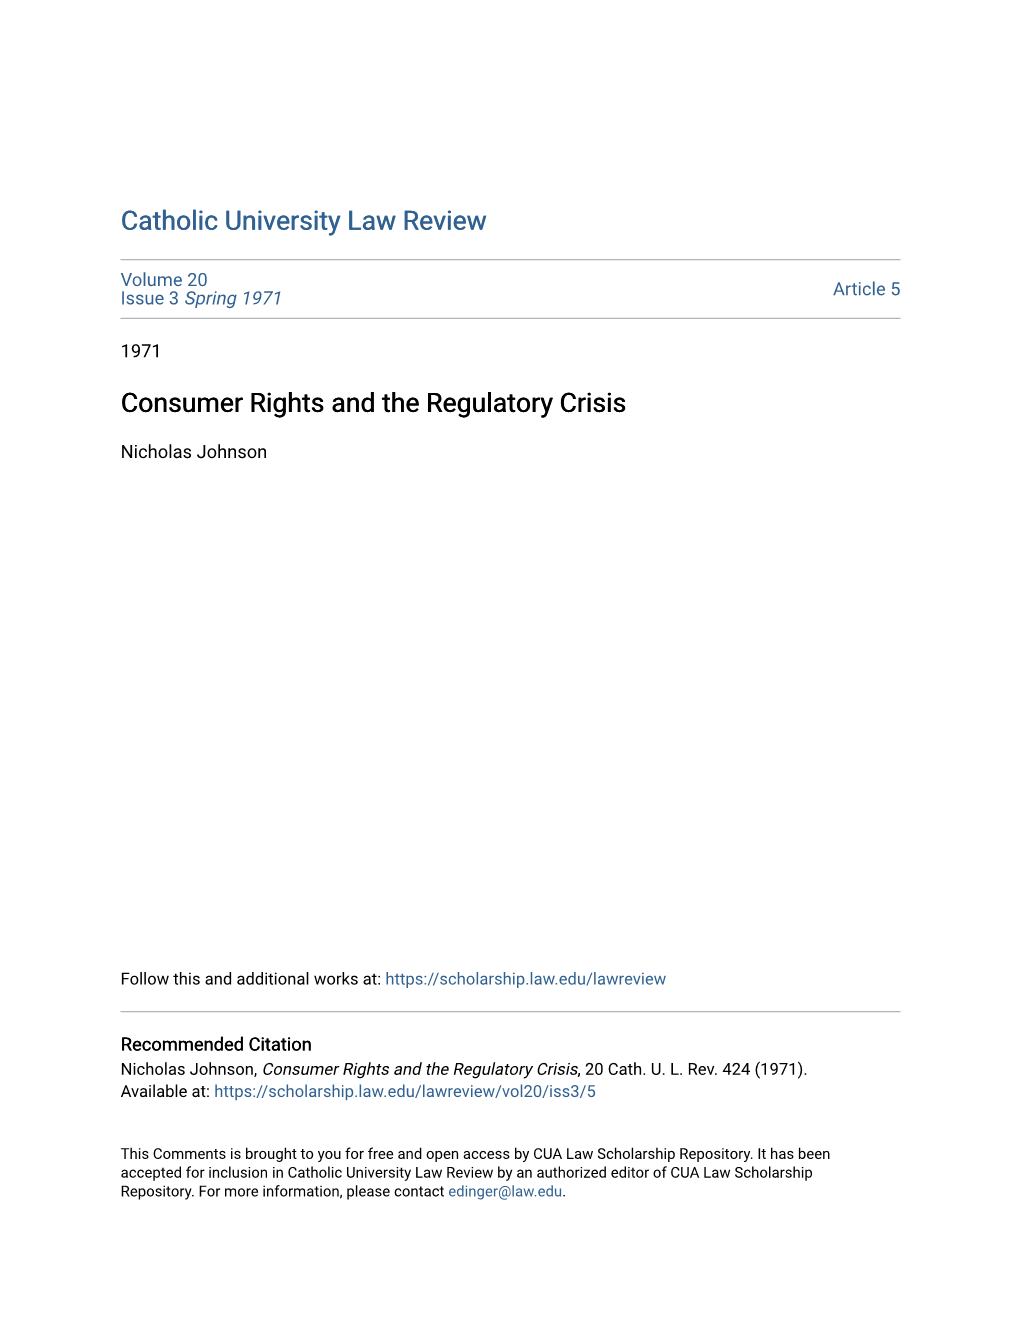 Consumer Rights and the Regulatory Crisis